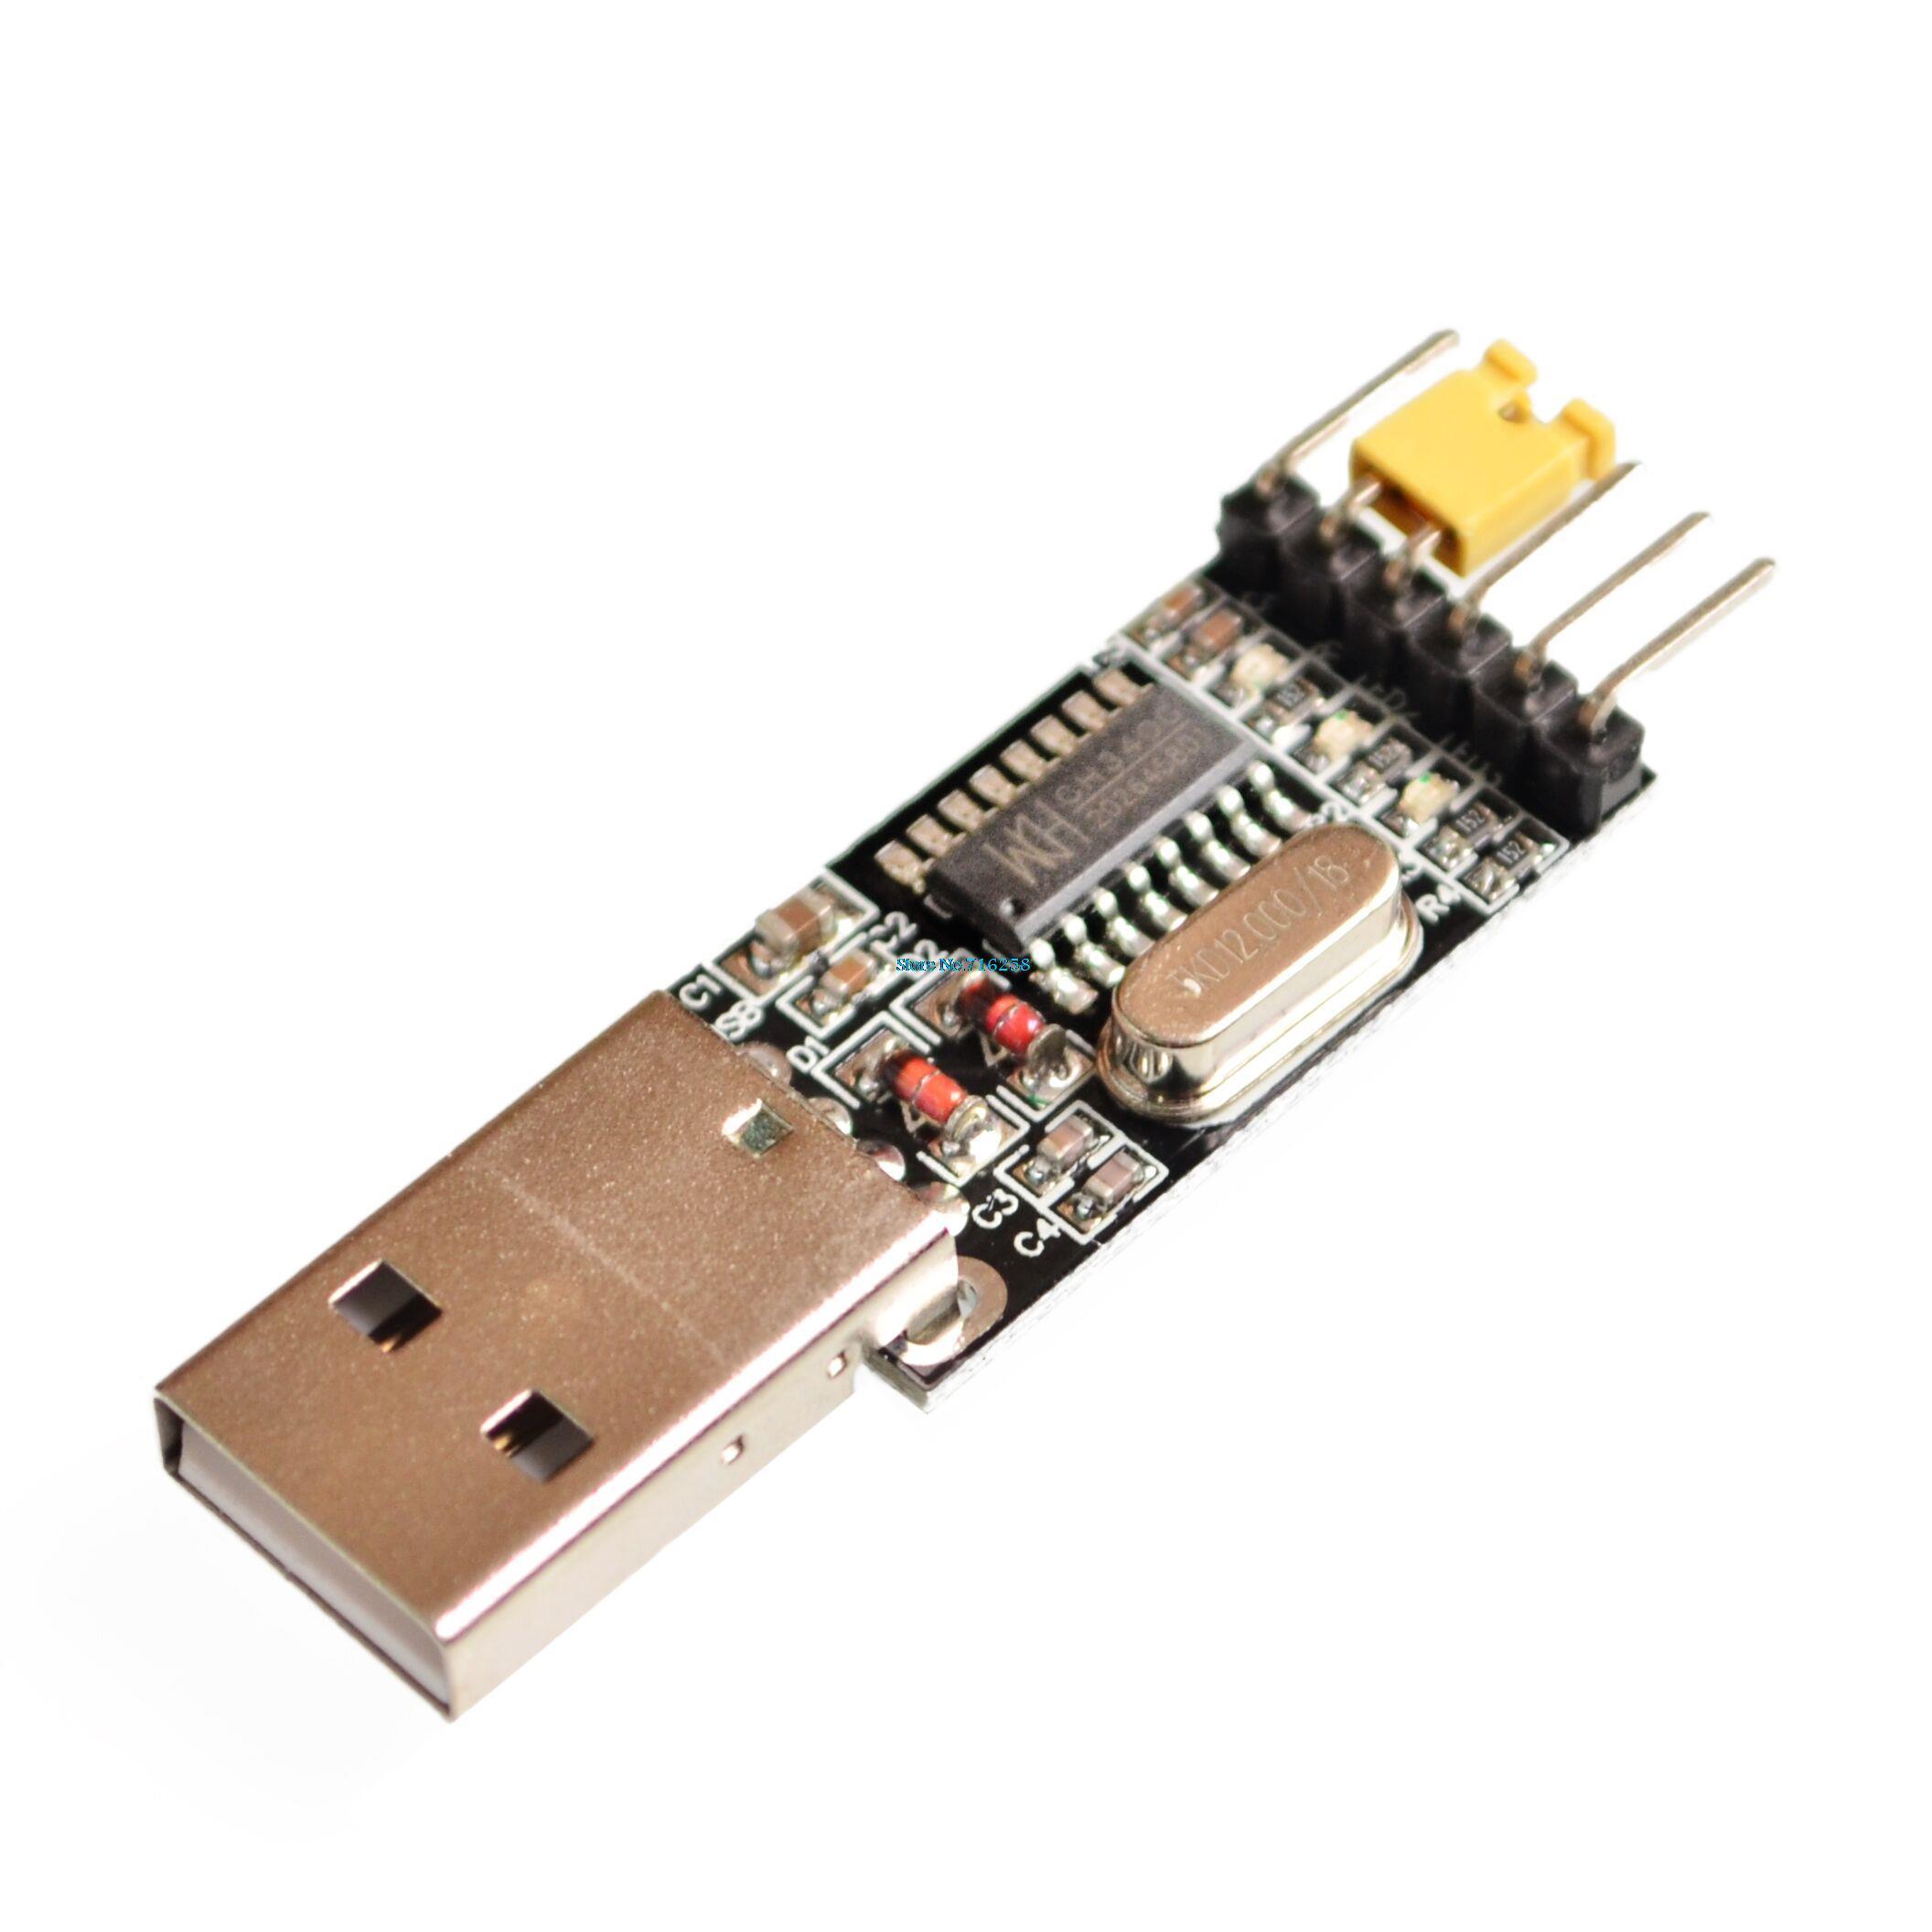 10pcs-lot-CH340-module-USB-to-TTL-CH340G-upgrade-download-a-small-wire-brush-plate-STC-microcontroller-board-USB-to-serial